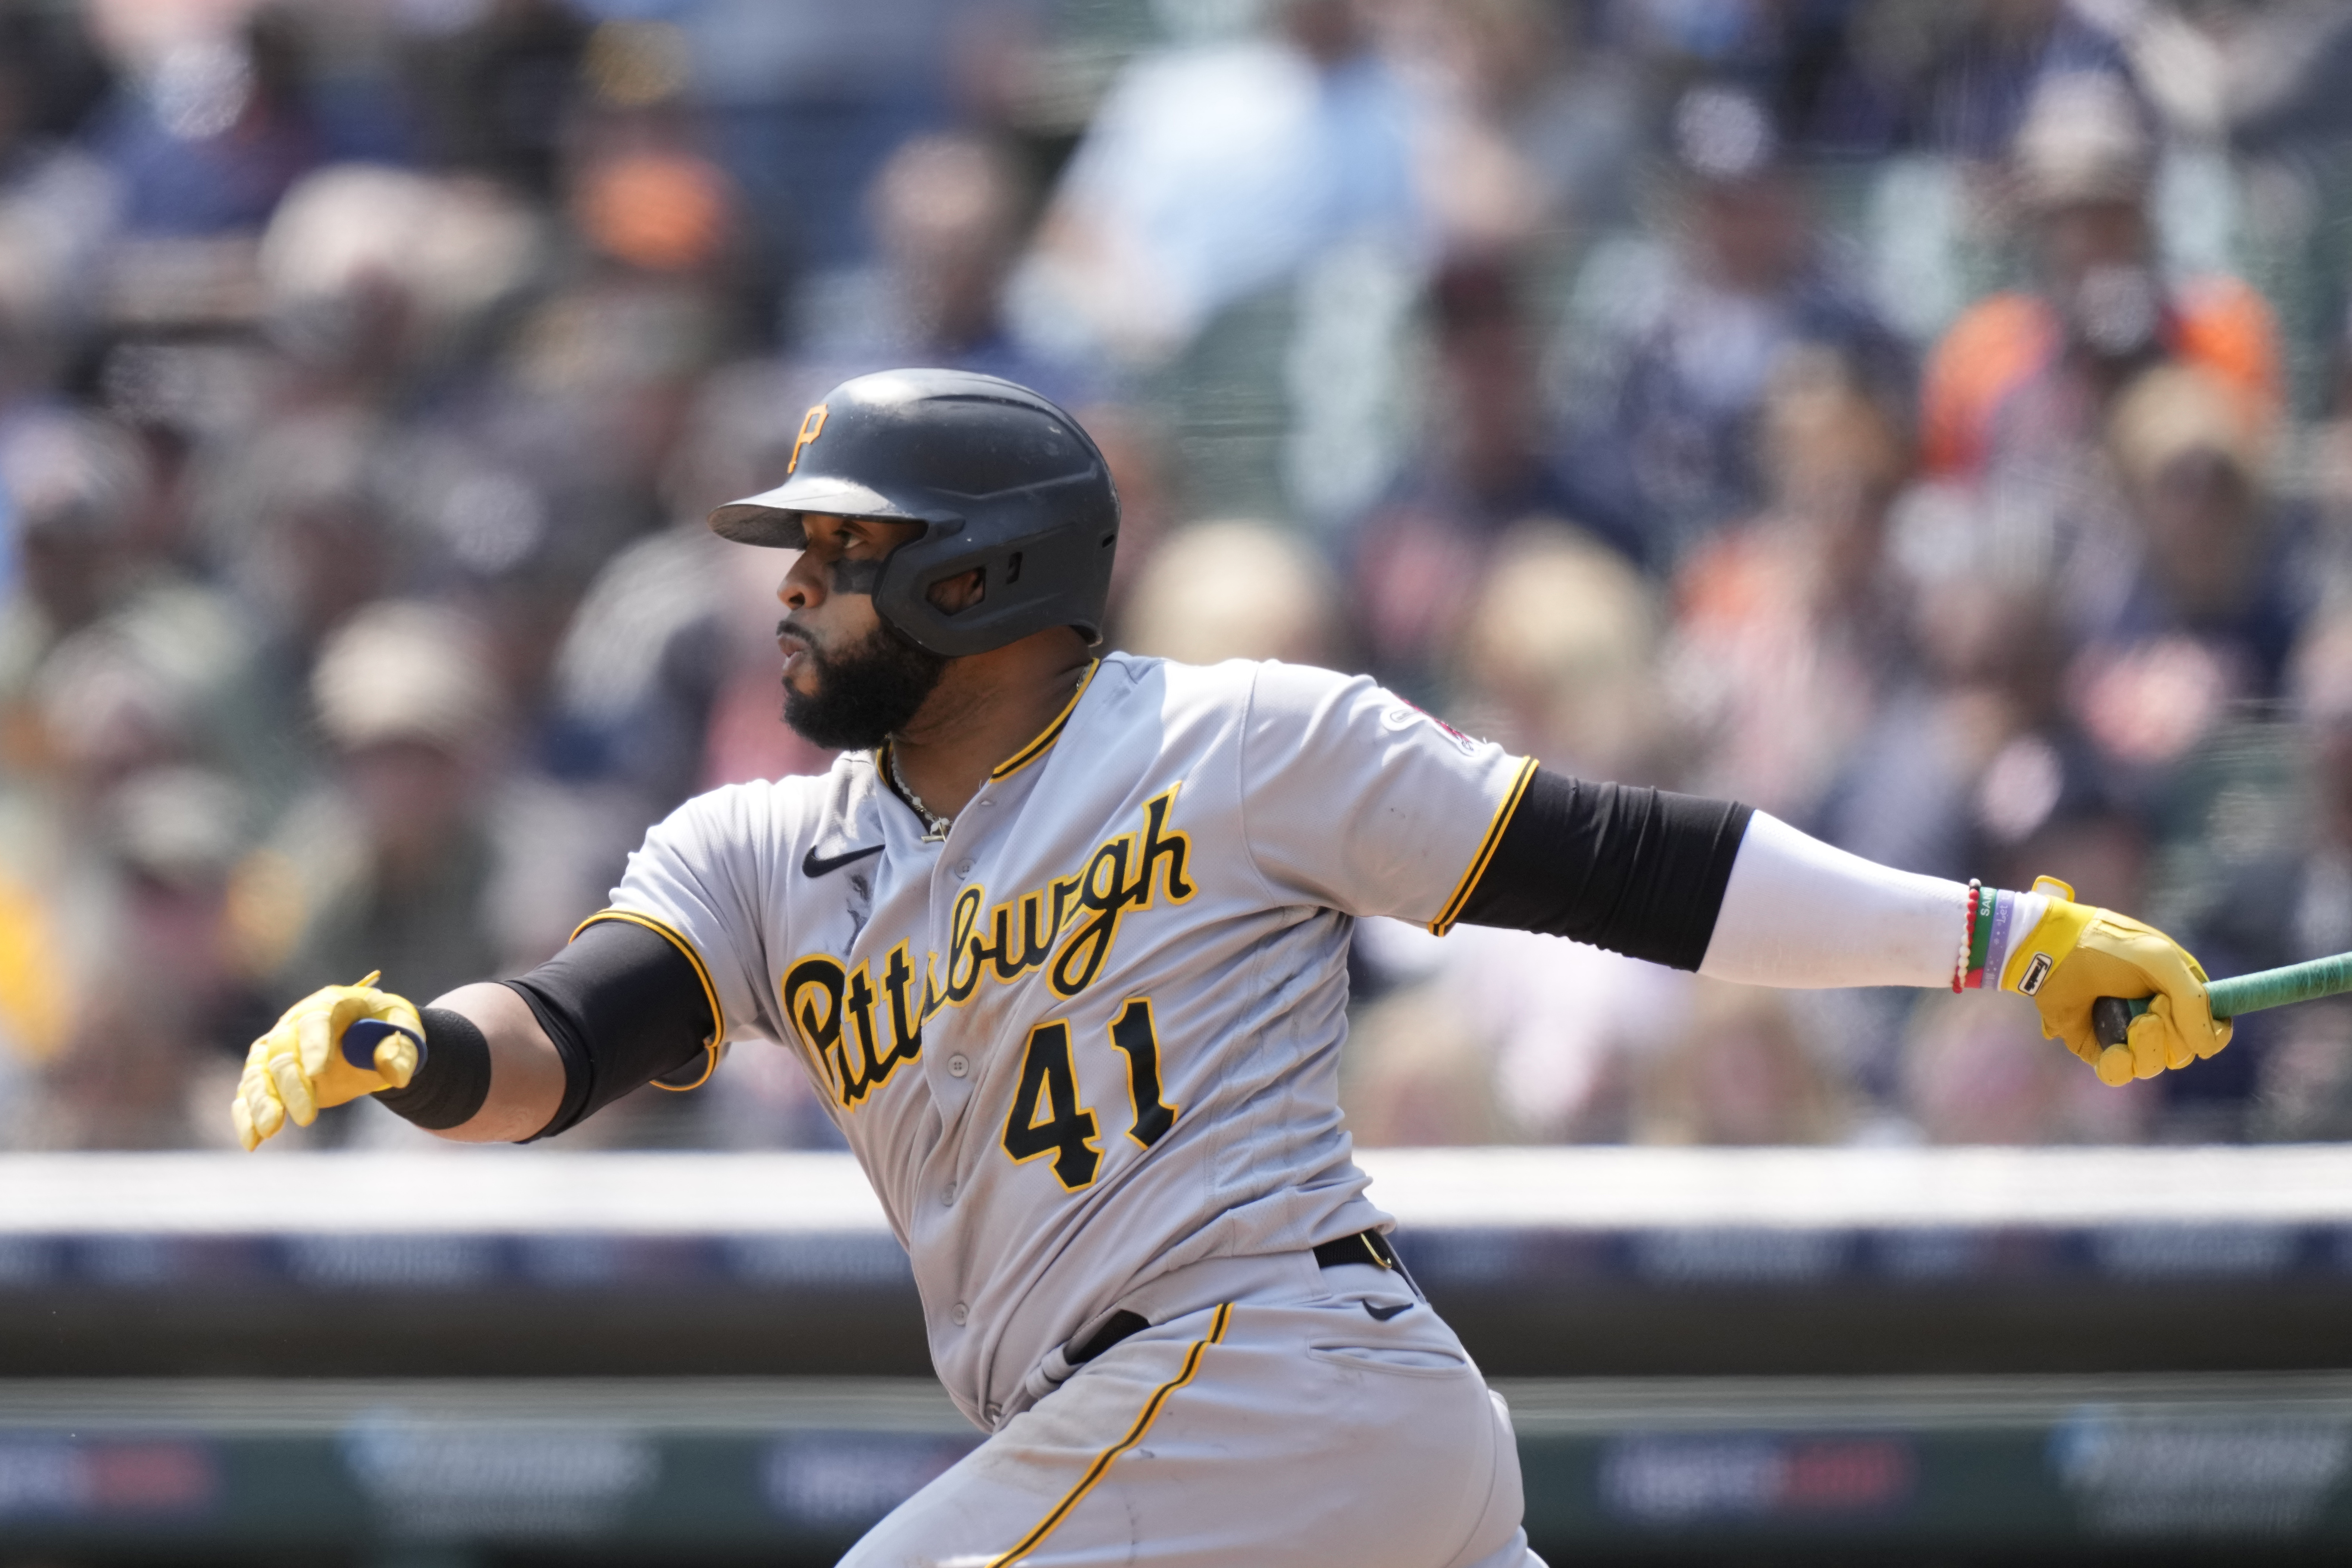 MLB Free Agency: Pittsburgh Pirates Agree To Deal With Carlos